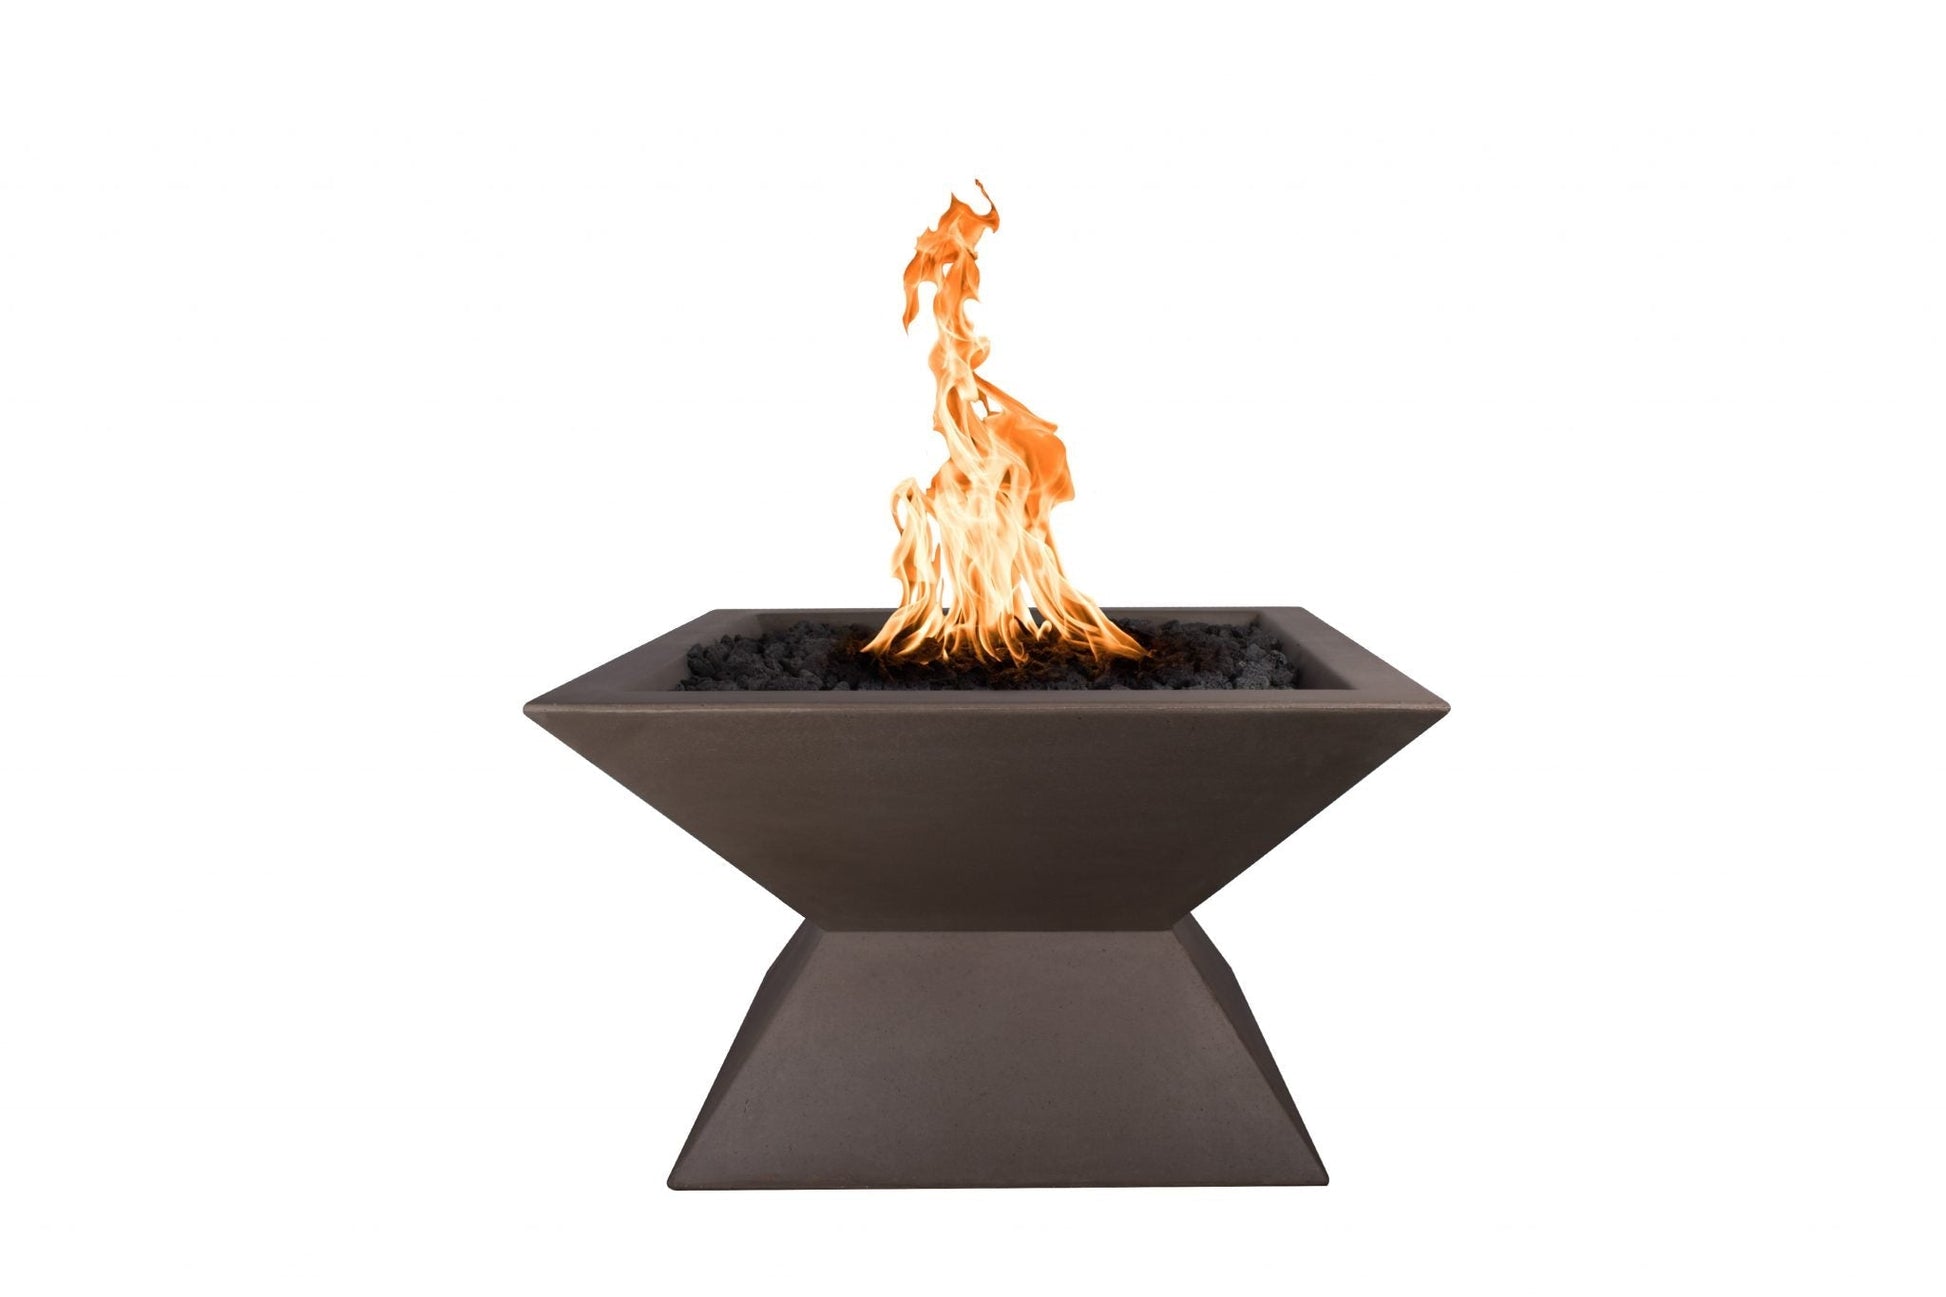 The Outdoor Plus Square Uxmal 30" Metallic Slate GFRC Concrete Liquid Propane Fire Pit with Match Lit Ignition